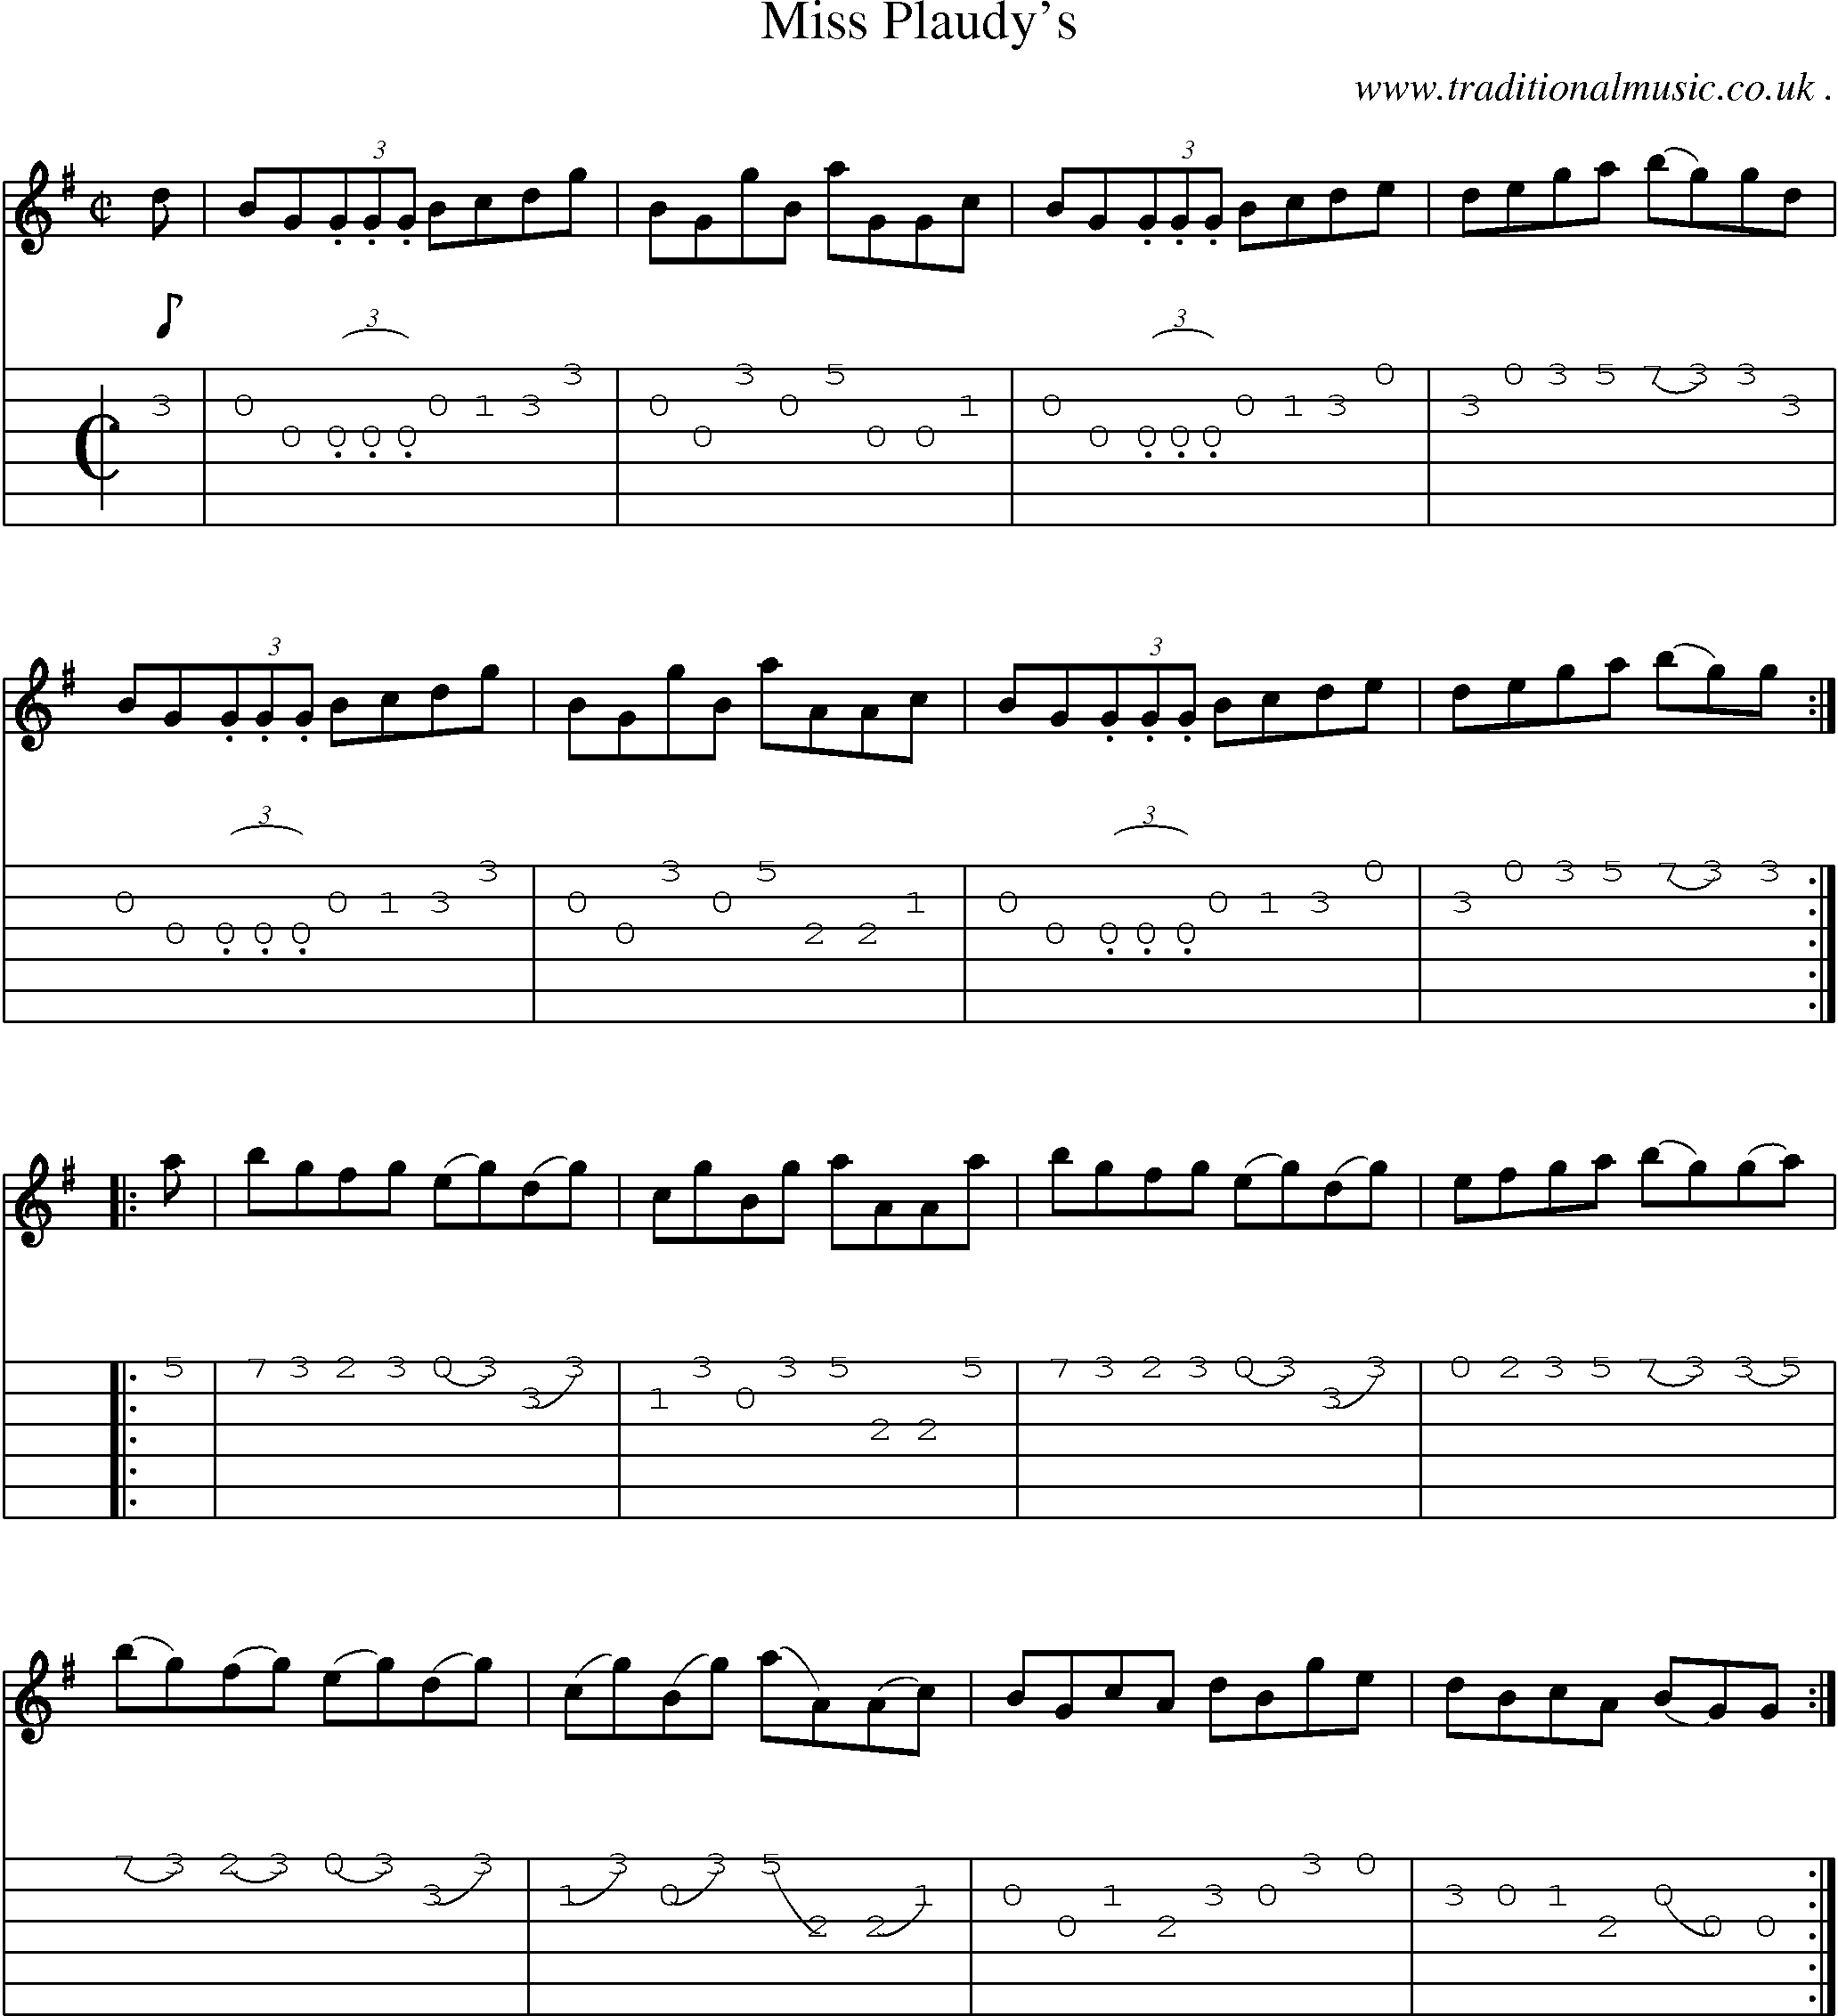 Sheet-Music and Guitar Tabs for Miss Plaudys